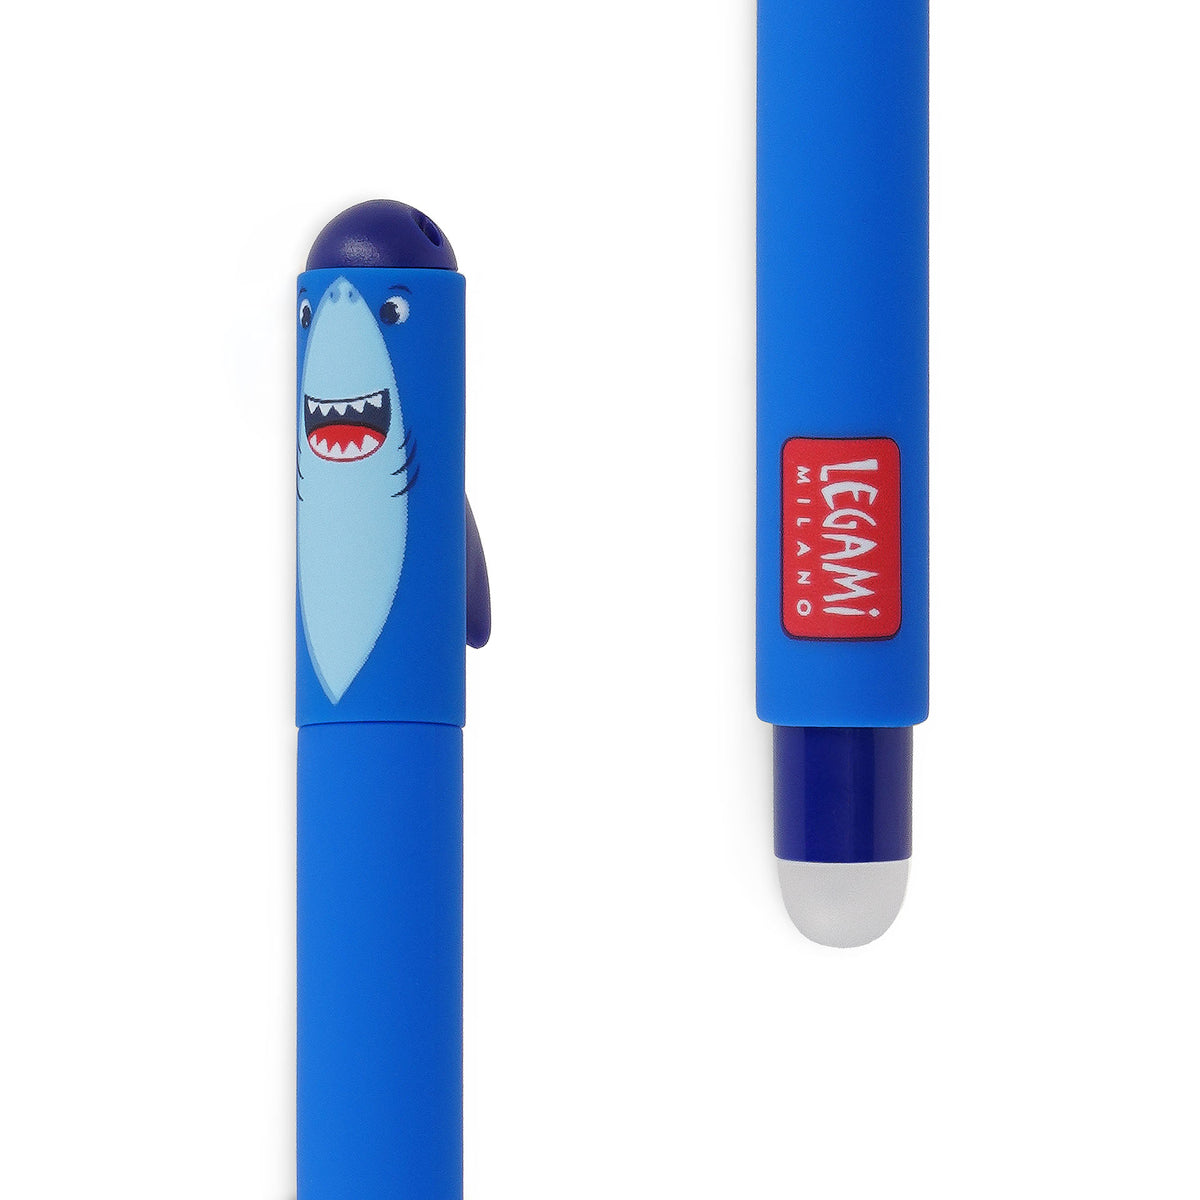 Image of an erasable pen lid and rubber in the shape of a shark.